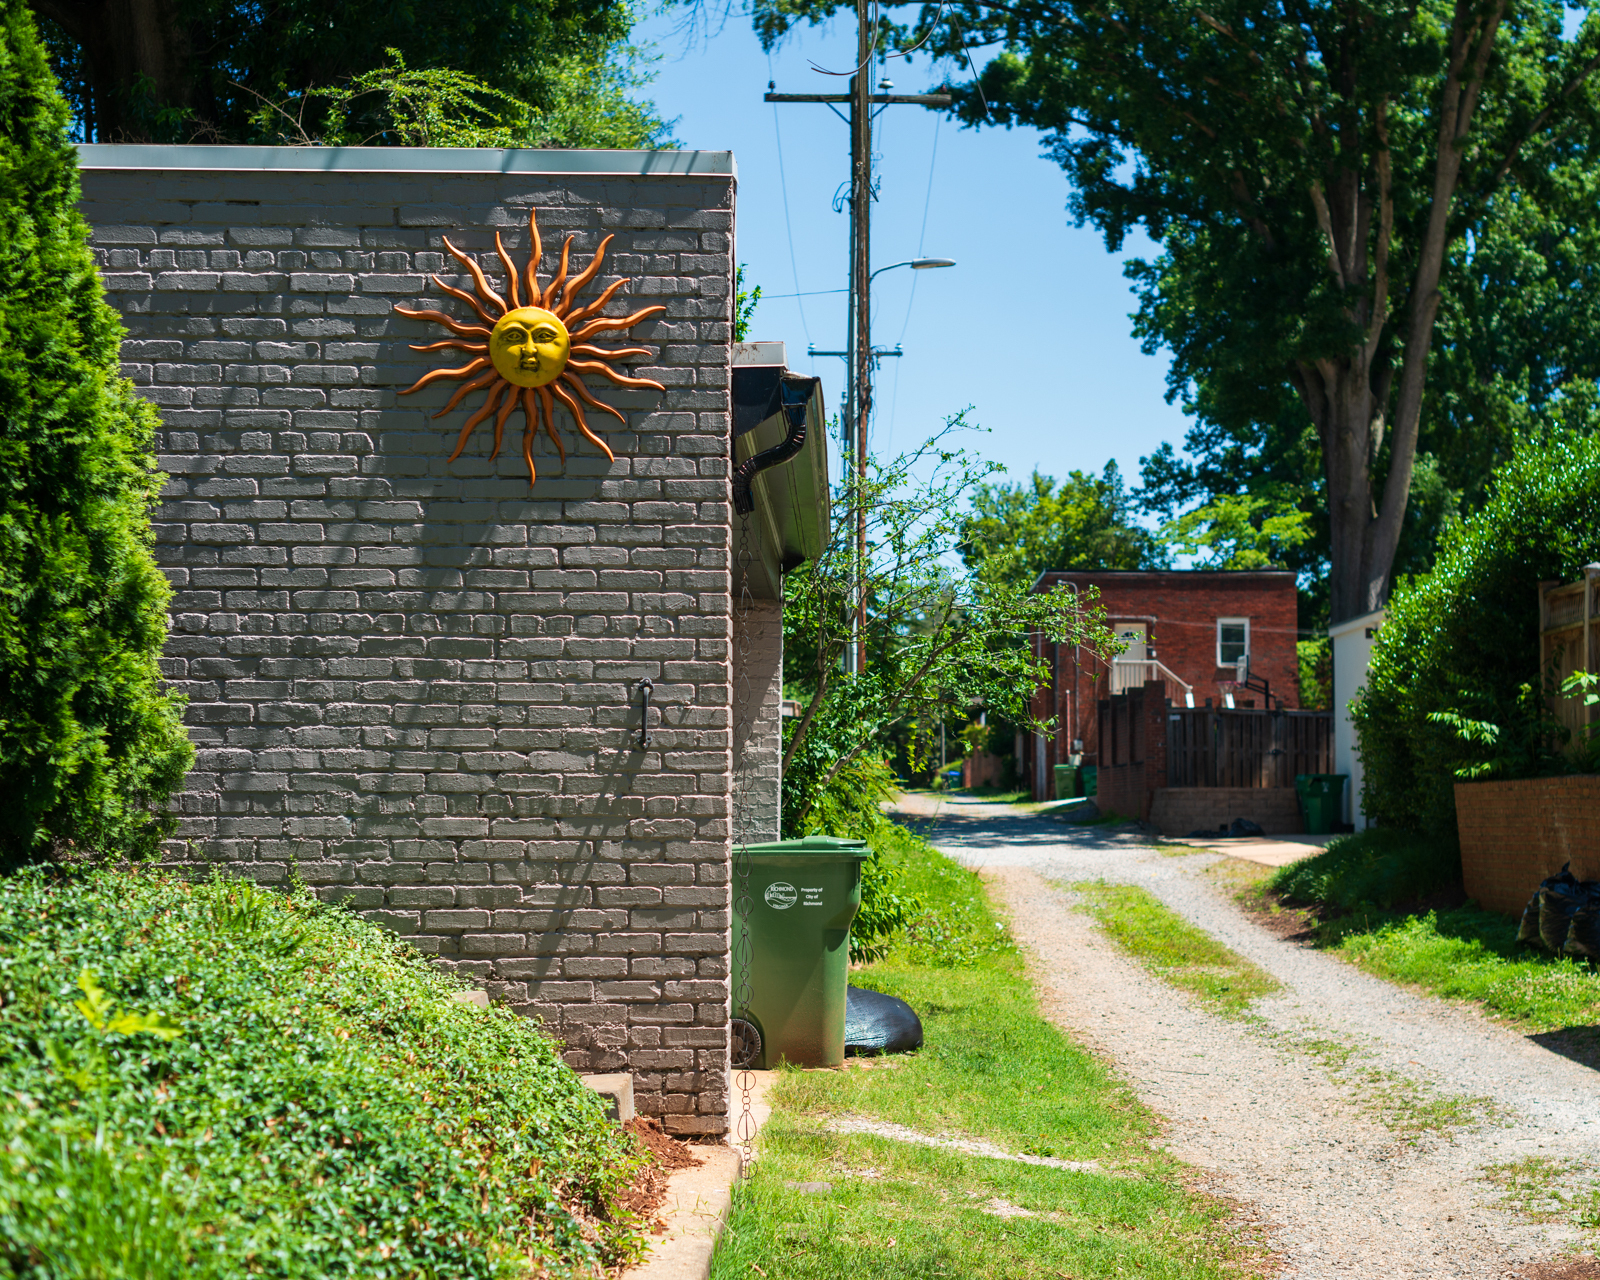 a sun relief sculpture on the side of a garage in an alleyway